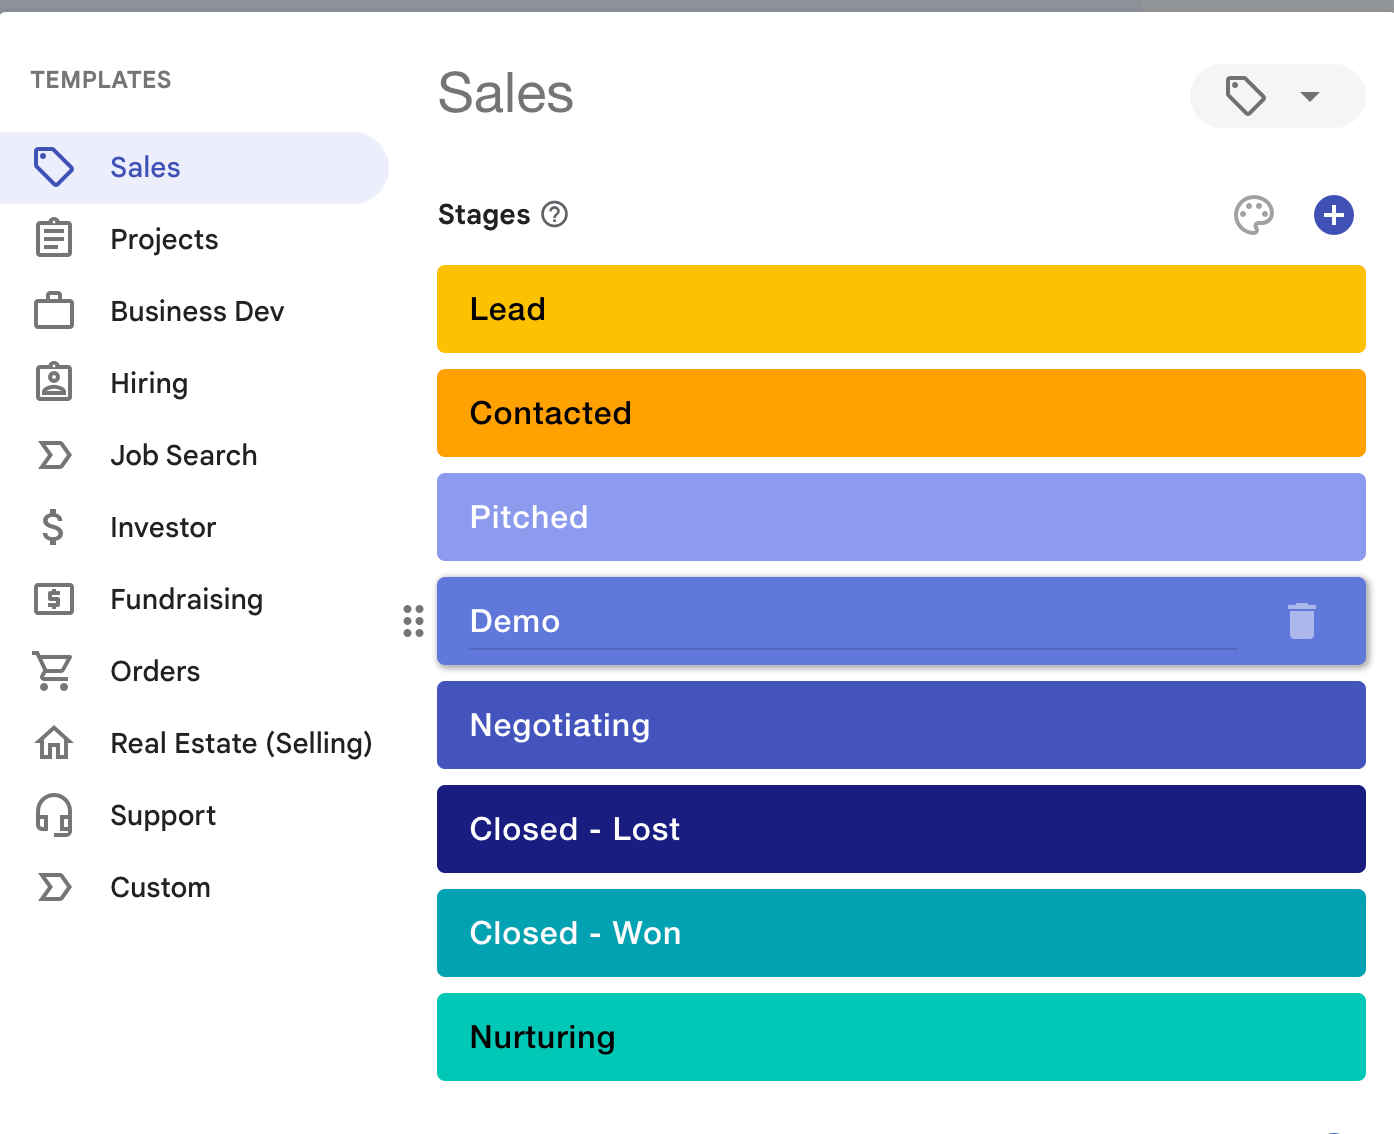 Sales pipeline with stages like Lead, Contacted, Pitched, Closed - Won, and Nurturing.